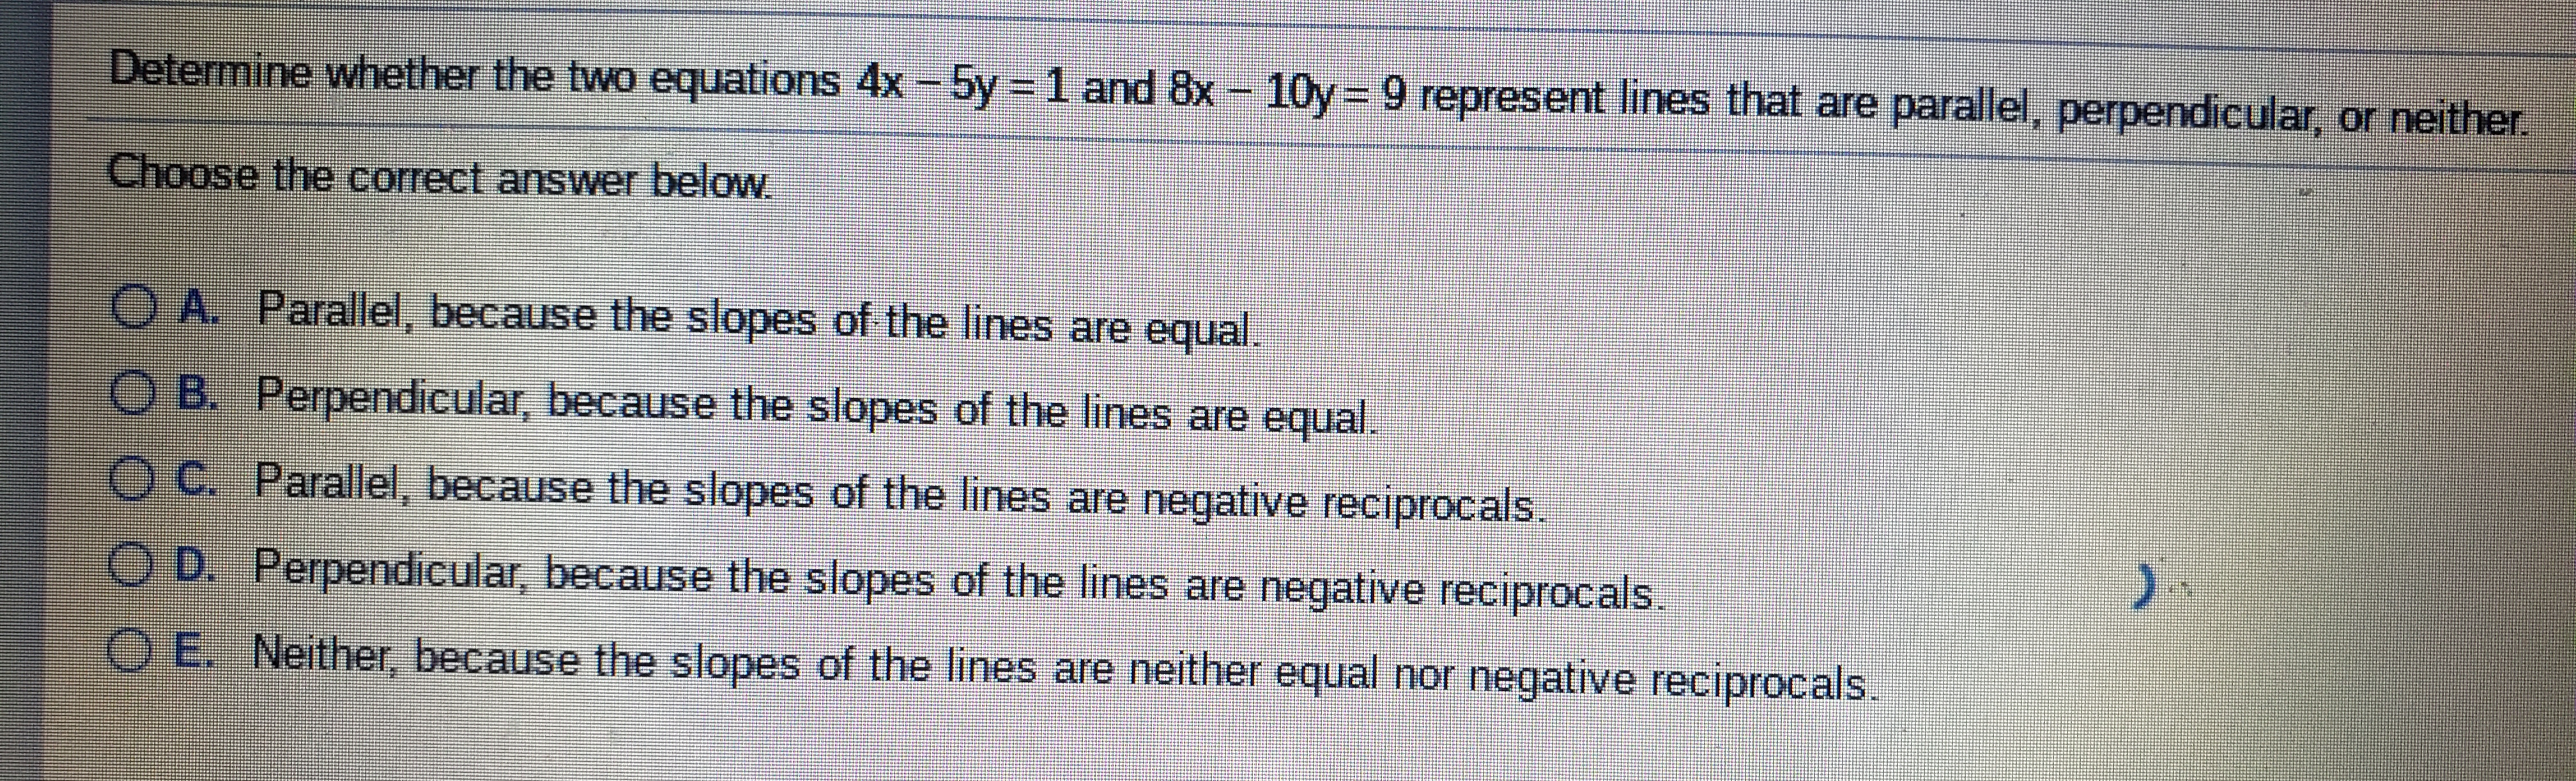 Determine whether the two equations 4x- 5y = 1 and 8x - 10y = 9 represent lines that are parallel, perpendicular, or neither.
Choose the correct answer below.
O A. Parallel, because the slopes of the lines are equal.
O B. Perpendicular, because the slopes of the lines are equal.
O C. Parallel, because the slopes of the lines are negative reciprocals.
O D. Perpendicular, because the slopes of the lines are negative reciprocals.
).
O E. Neither, because the slopes of the lines are neither equal nor negative reciprocals.
